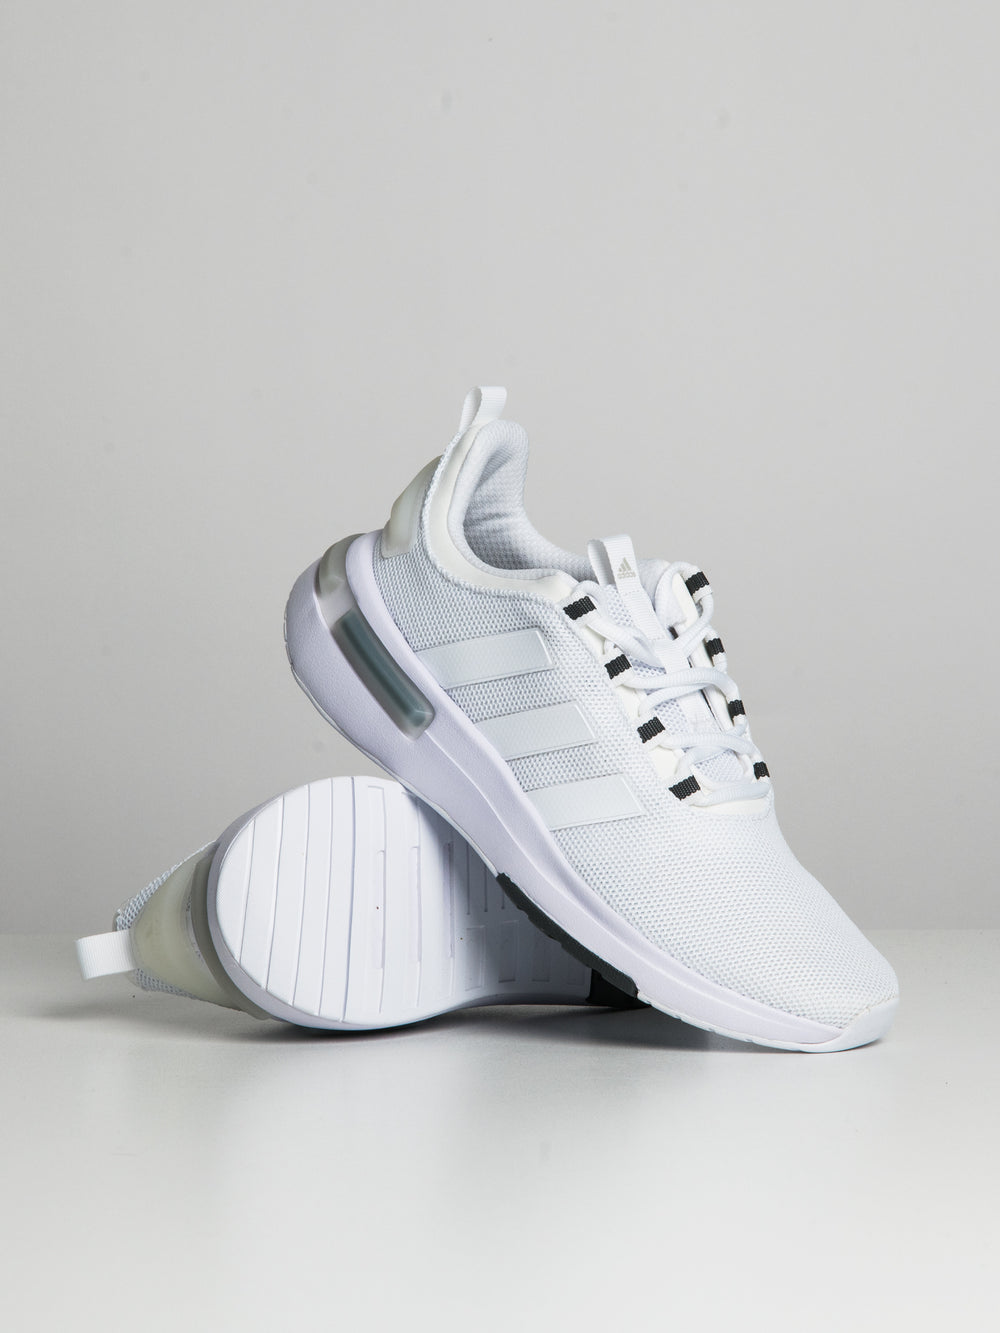 ADIDAS RACER TR23 HOMME